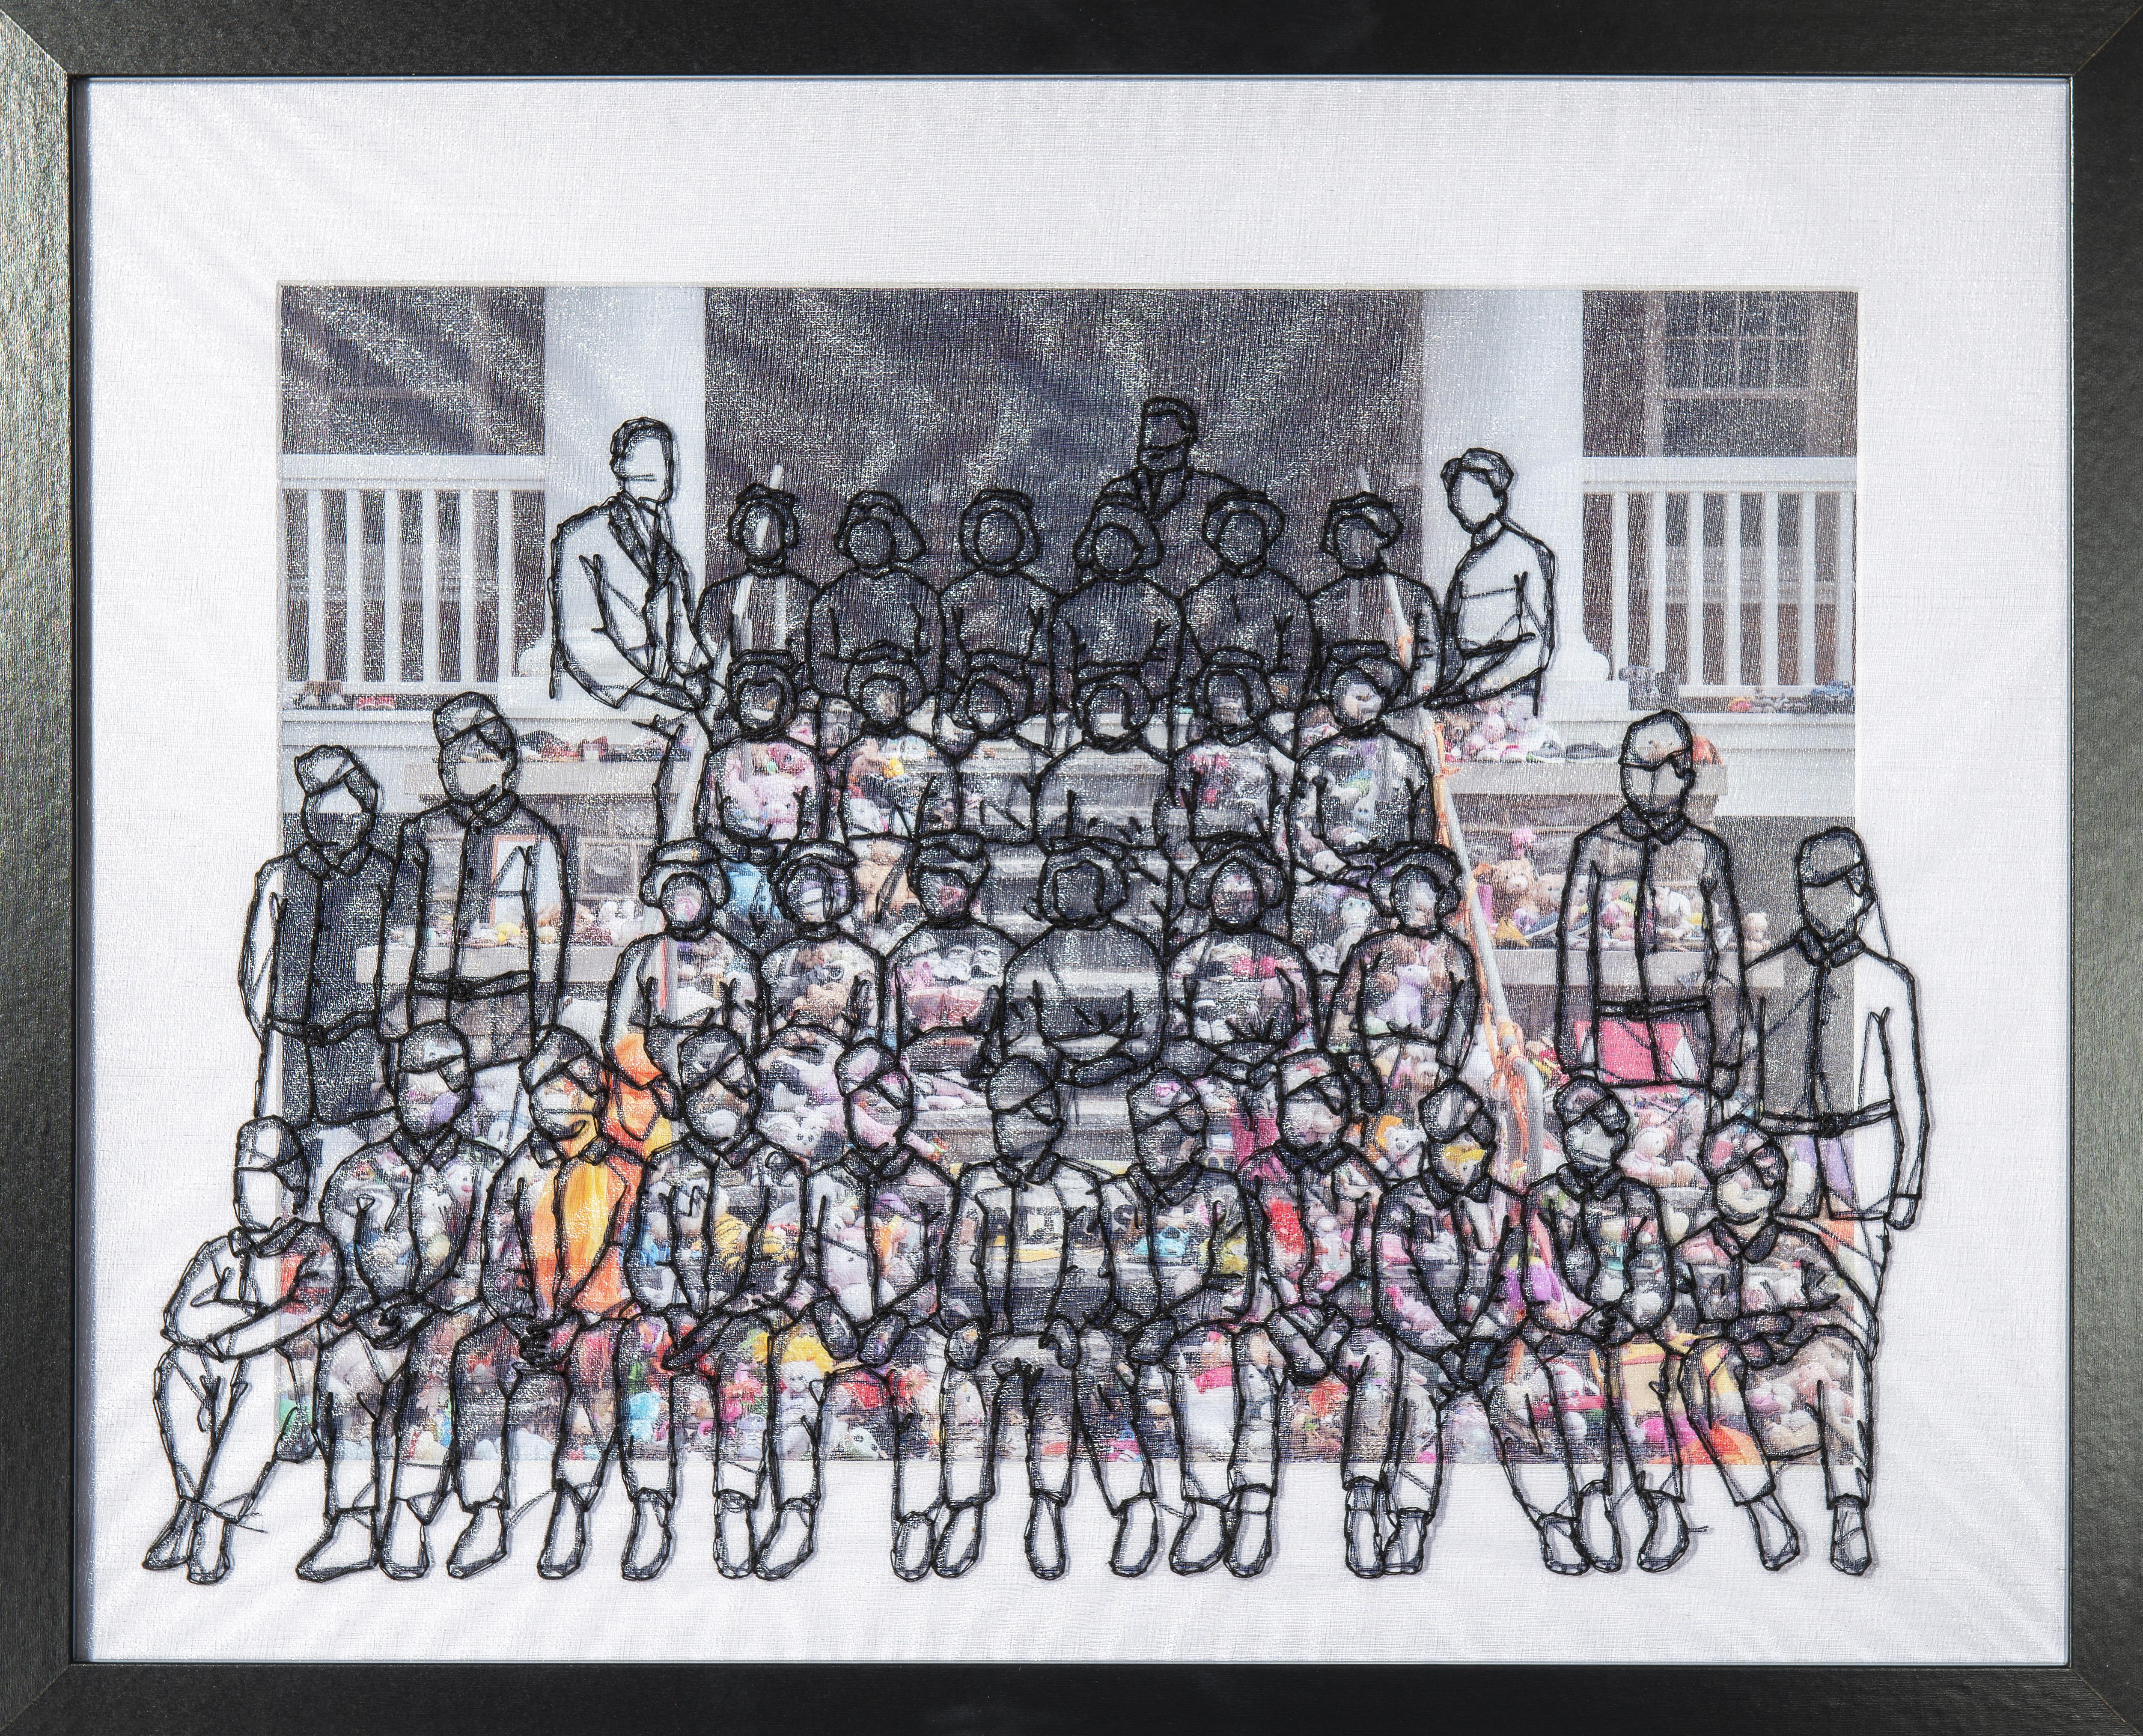 A piece of art that uses string to stitch the outlines of people overtop a photograph.